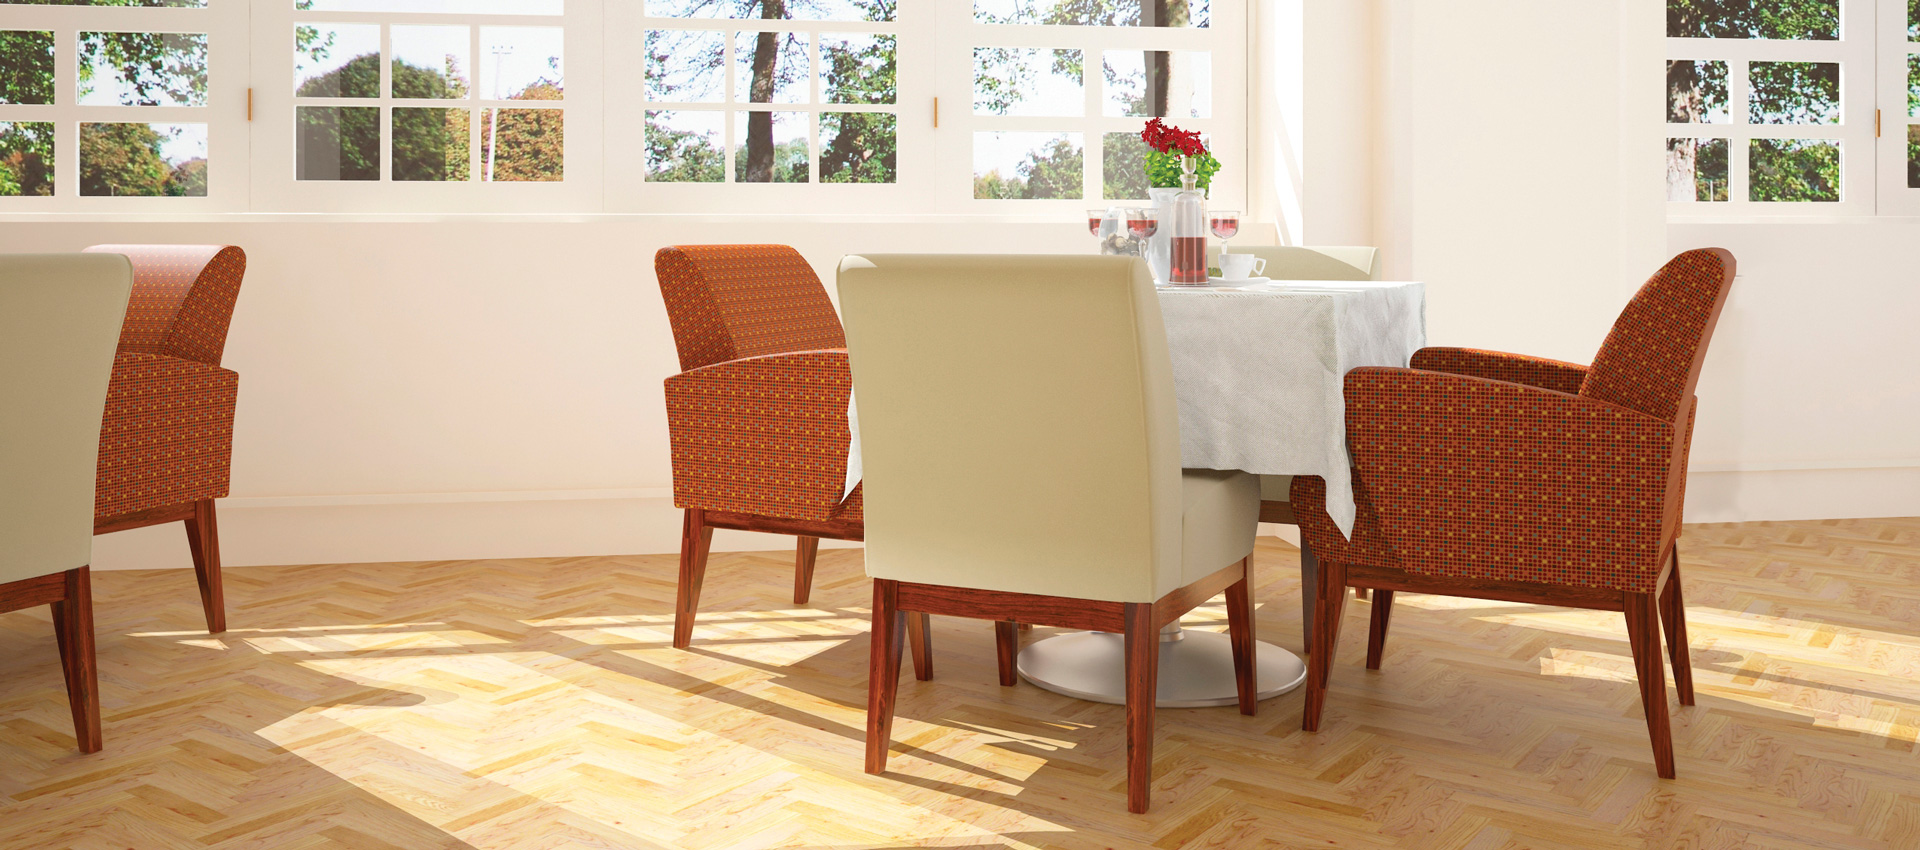 Dining room furniture for senior care facility, in beautiful uplifting environment